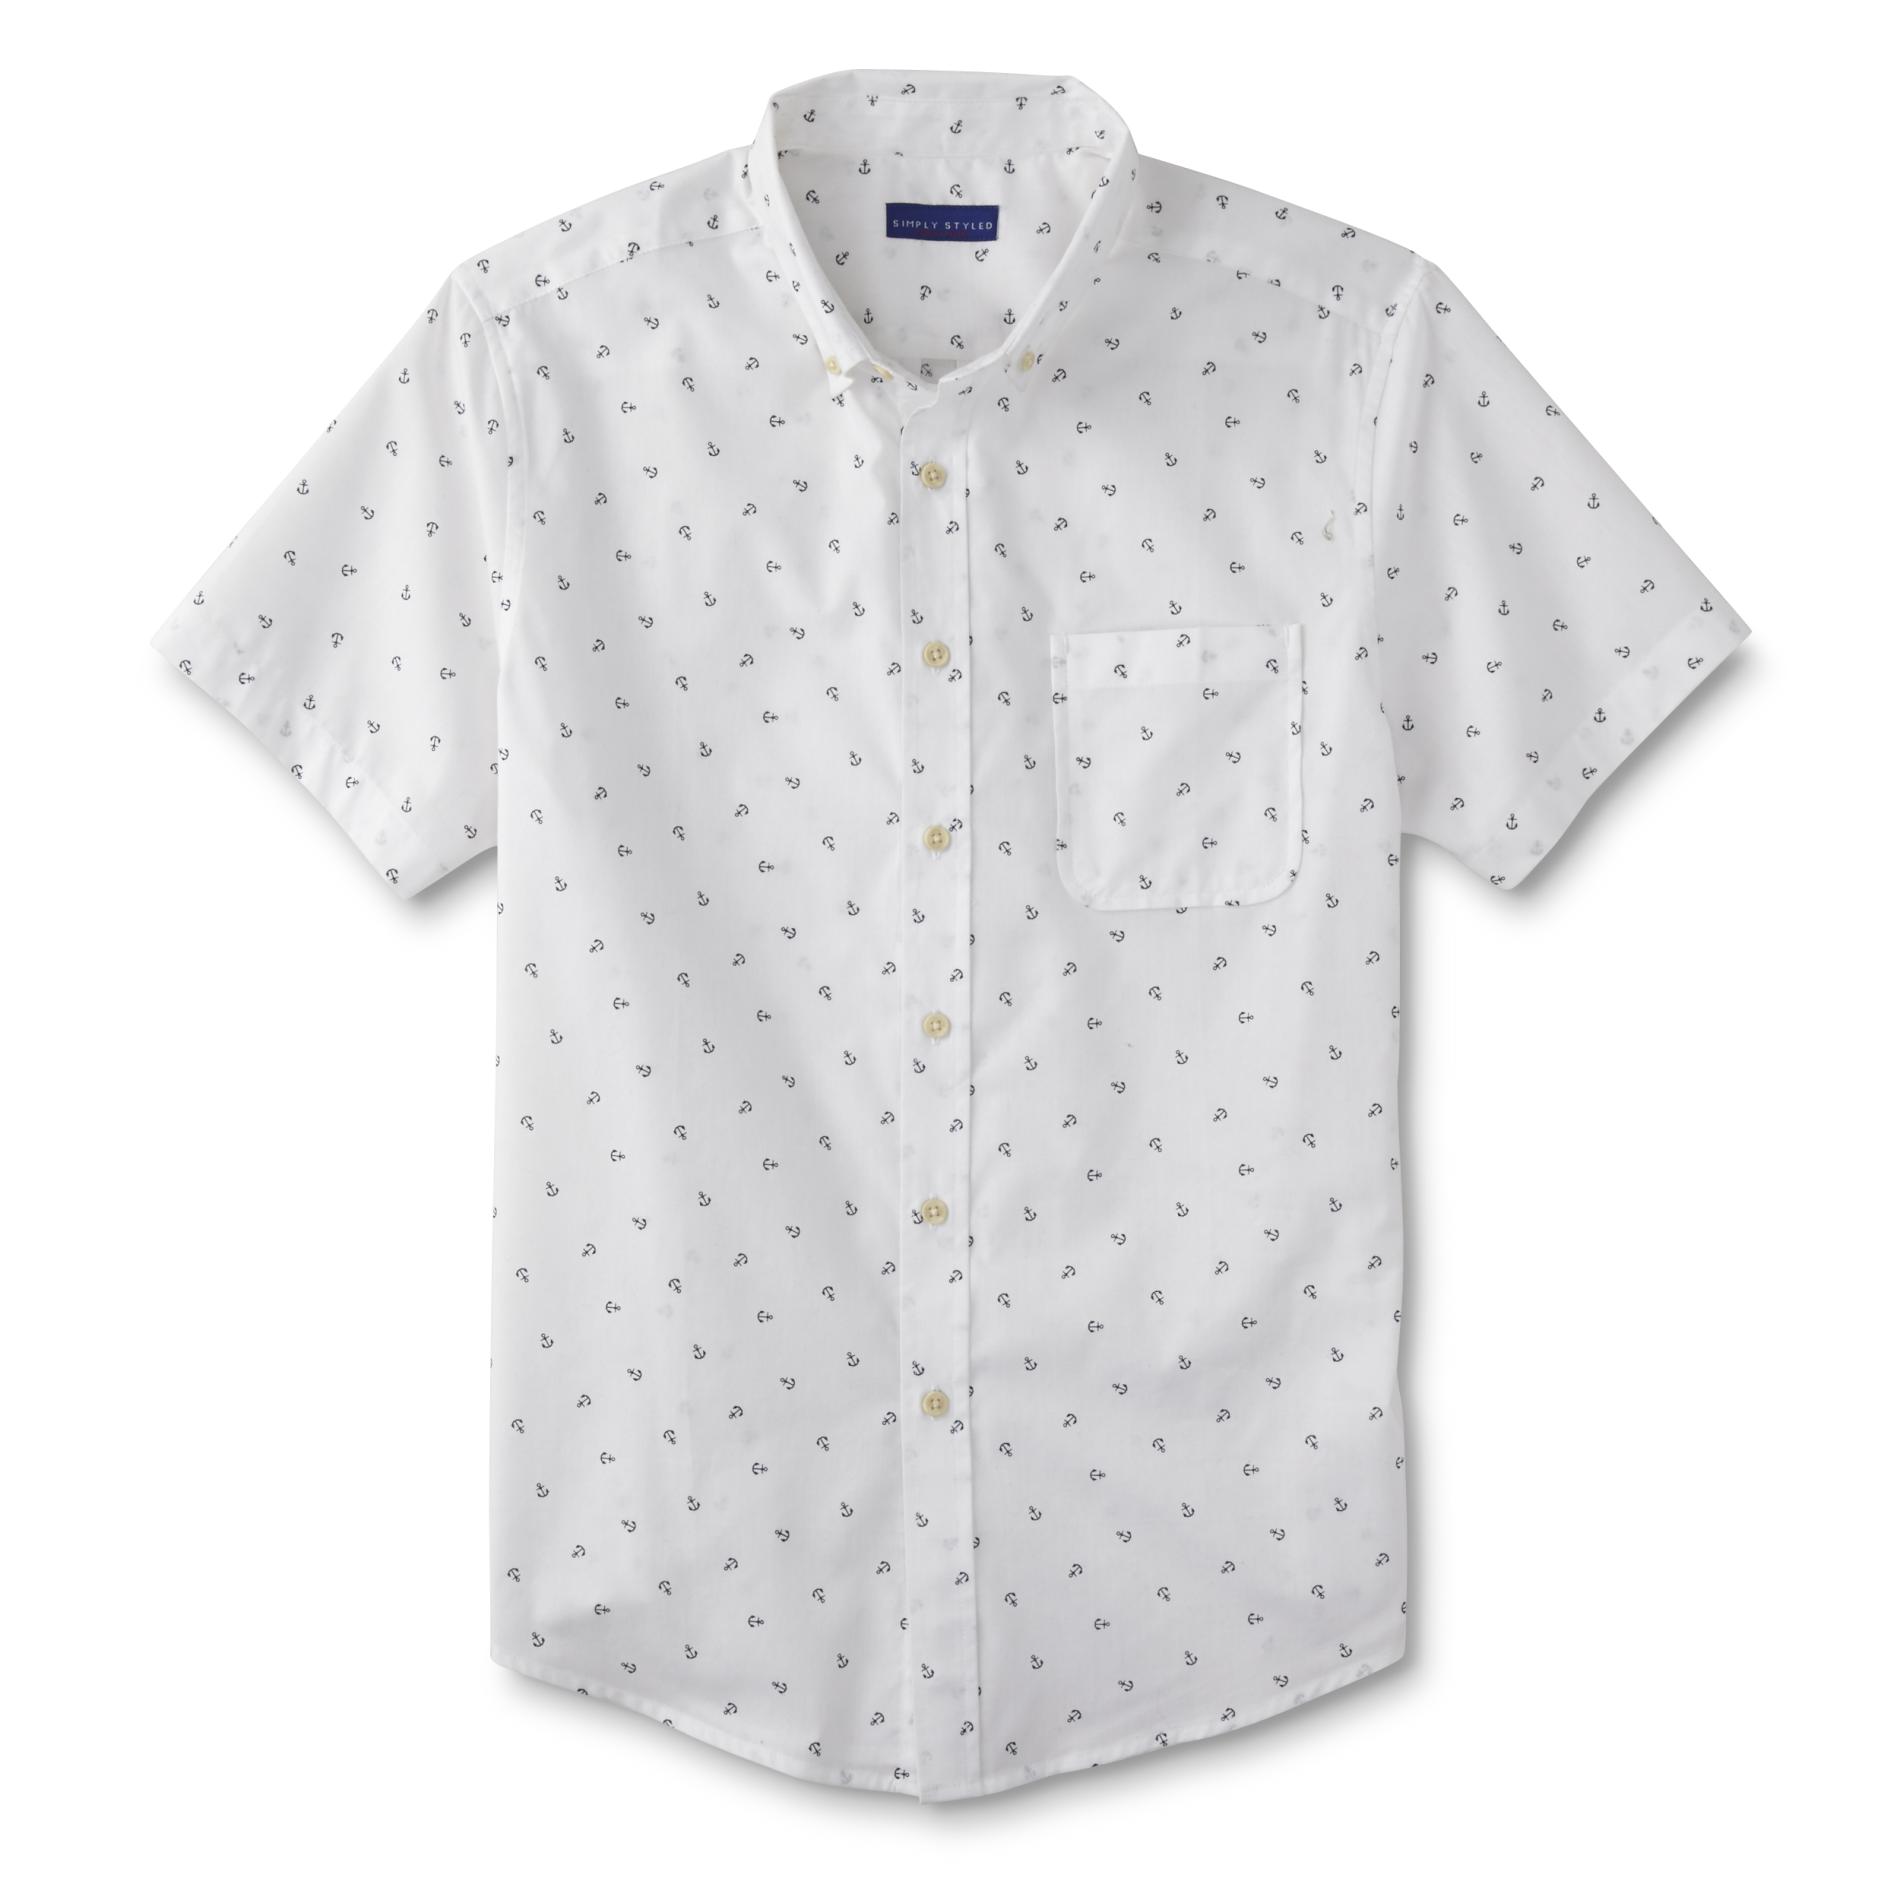 Simply Styled Men's Button-Front Shirt - Anchors